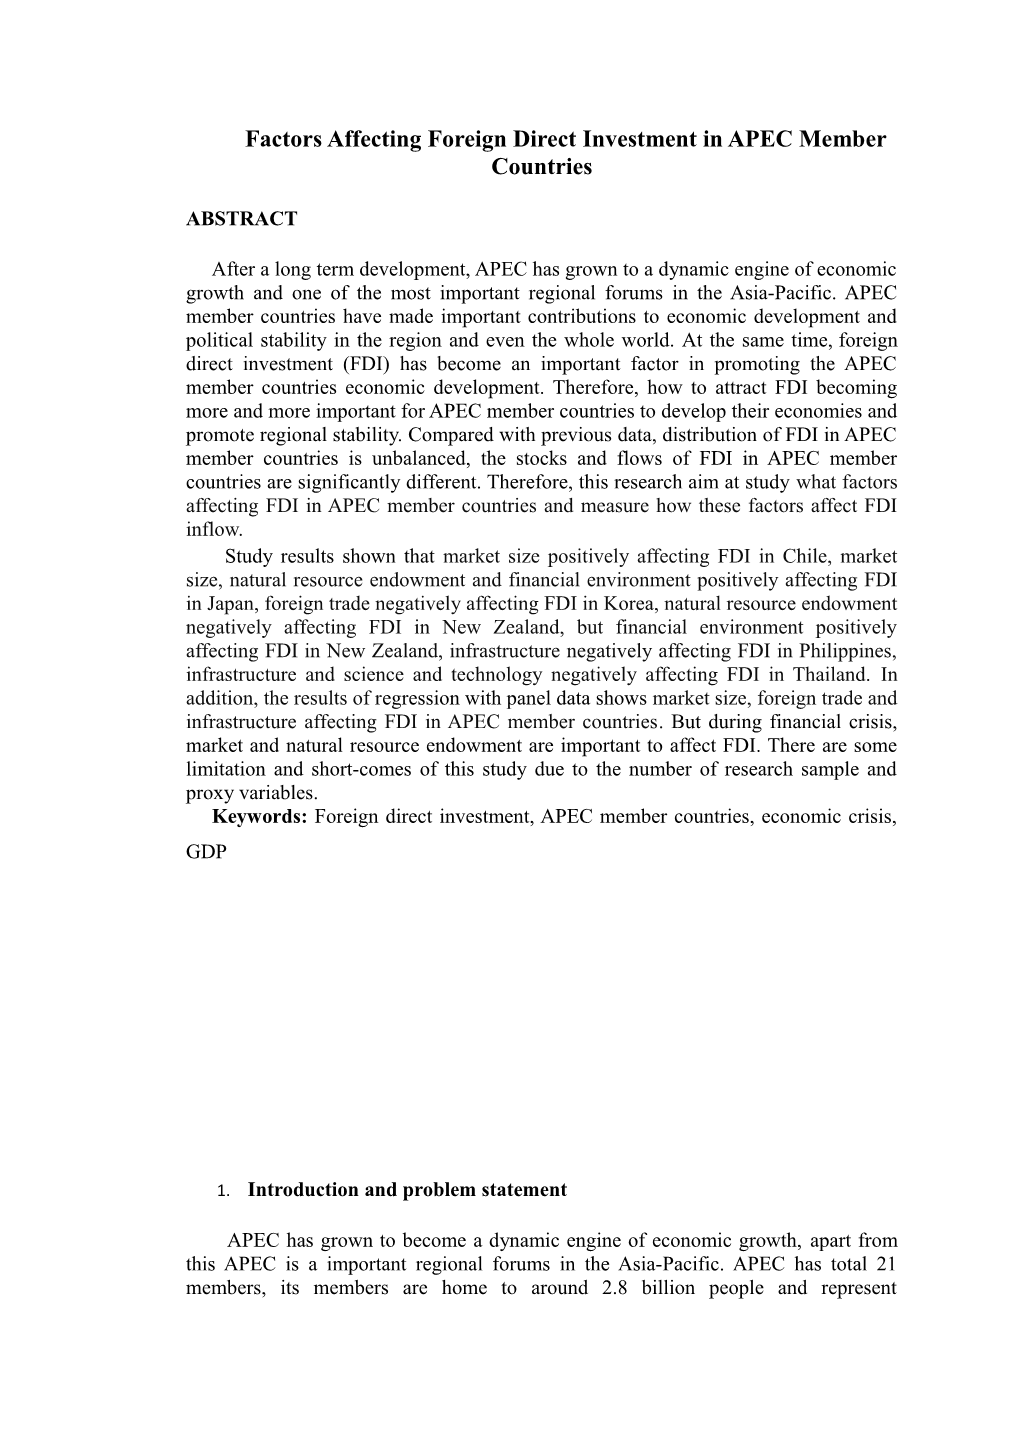 Factors Affecting Foreign Direct Investment in APEC Member Countries